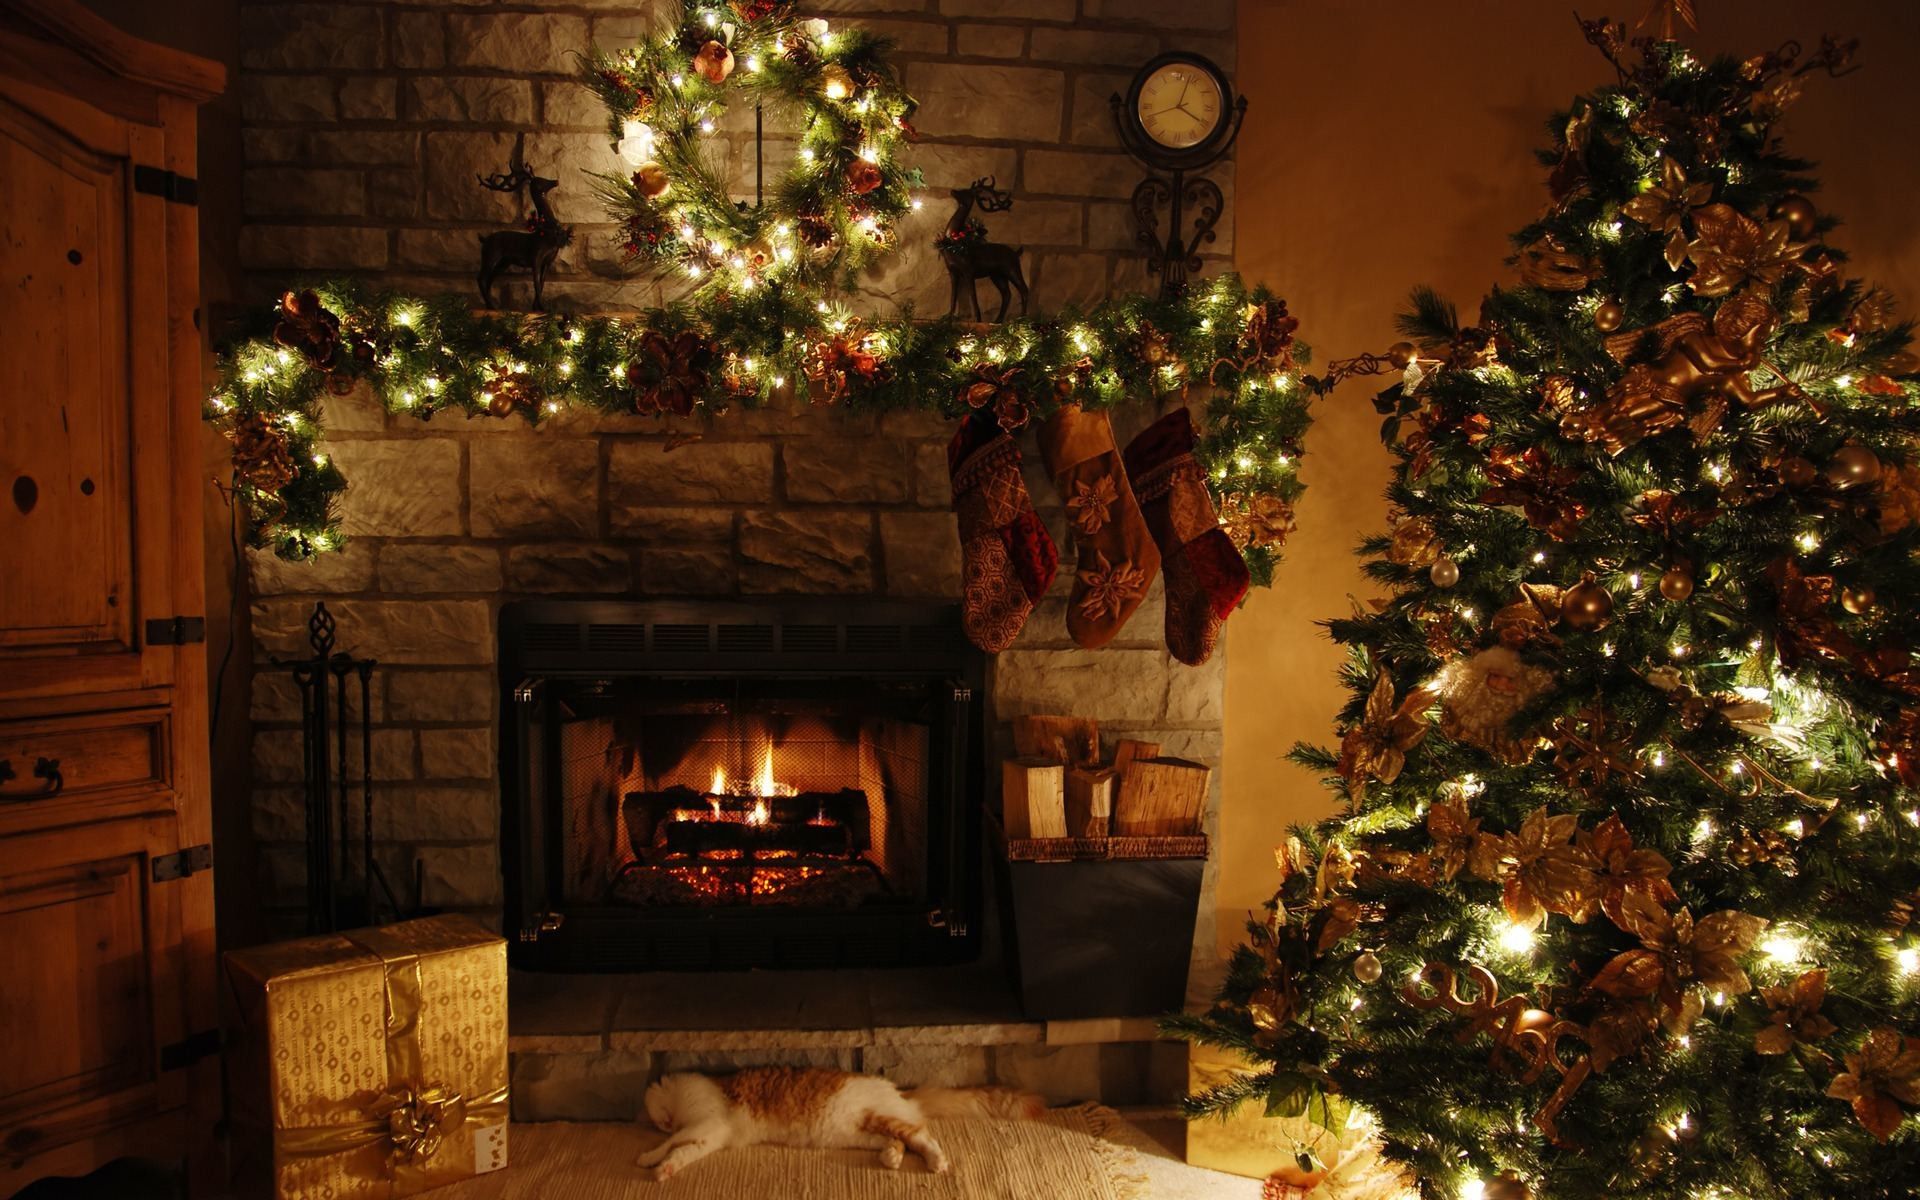 Free download Christmas Fireplace Wallpaper - [1920x1200] for your Desktop, Mobile & Tablet. Explore Christmas Fireplace Wallpaper. Christmas Fireplace Wallpaper, Christmas Fireplace Background, Christmas Fireplace Wallpaper